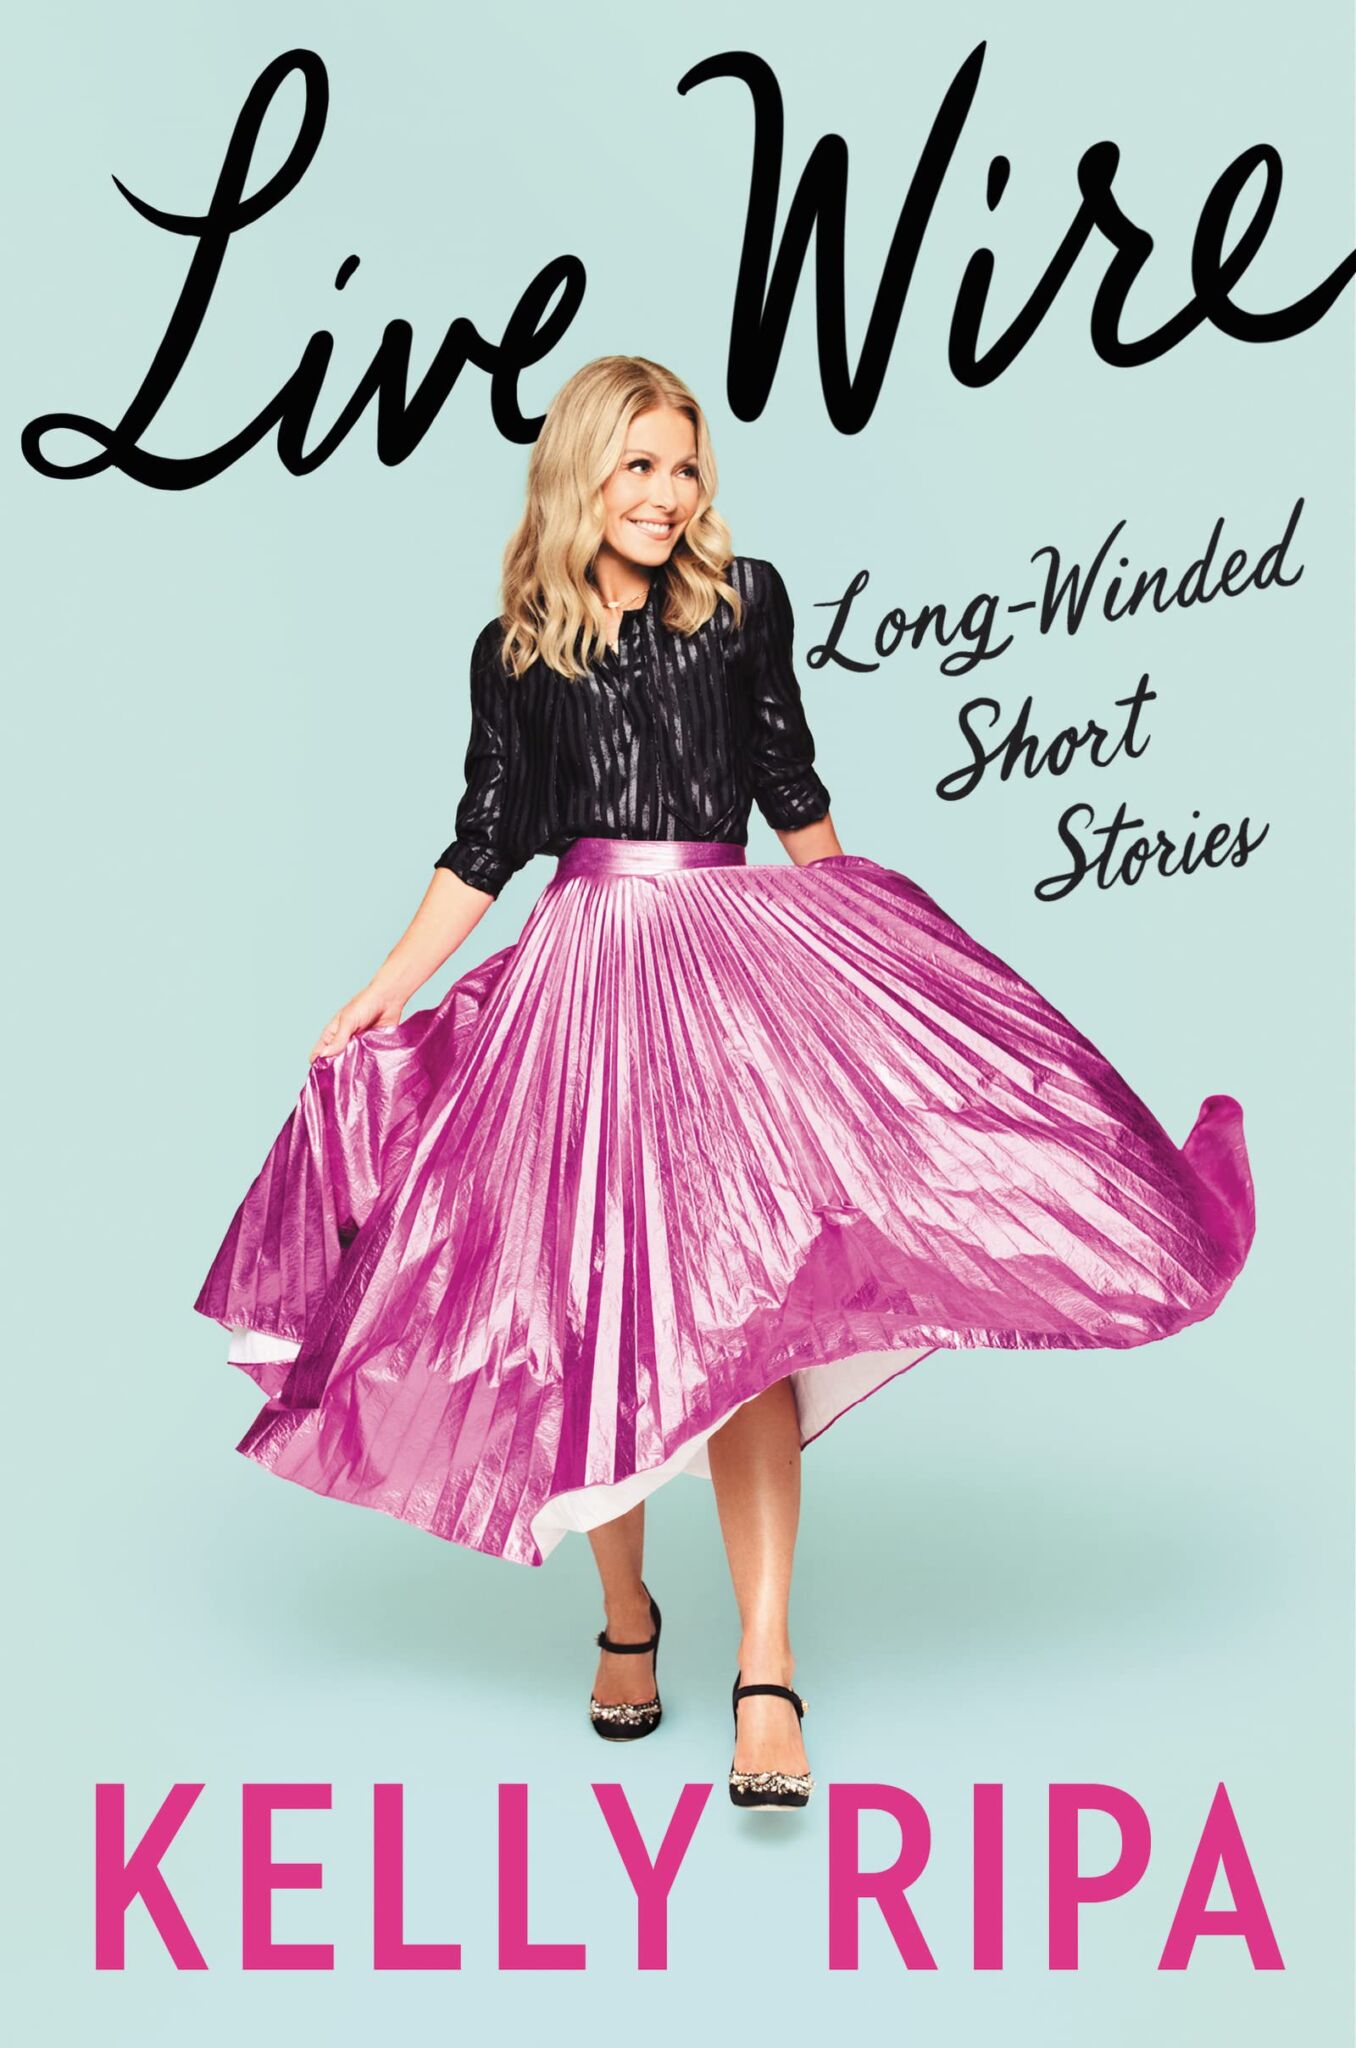 Kelly Ripa Talks On Her New Memoir Live Wire Long Winded Short